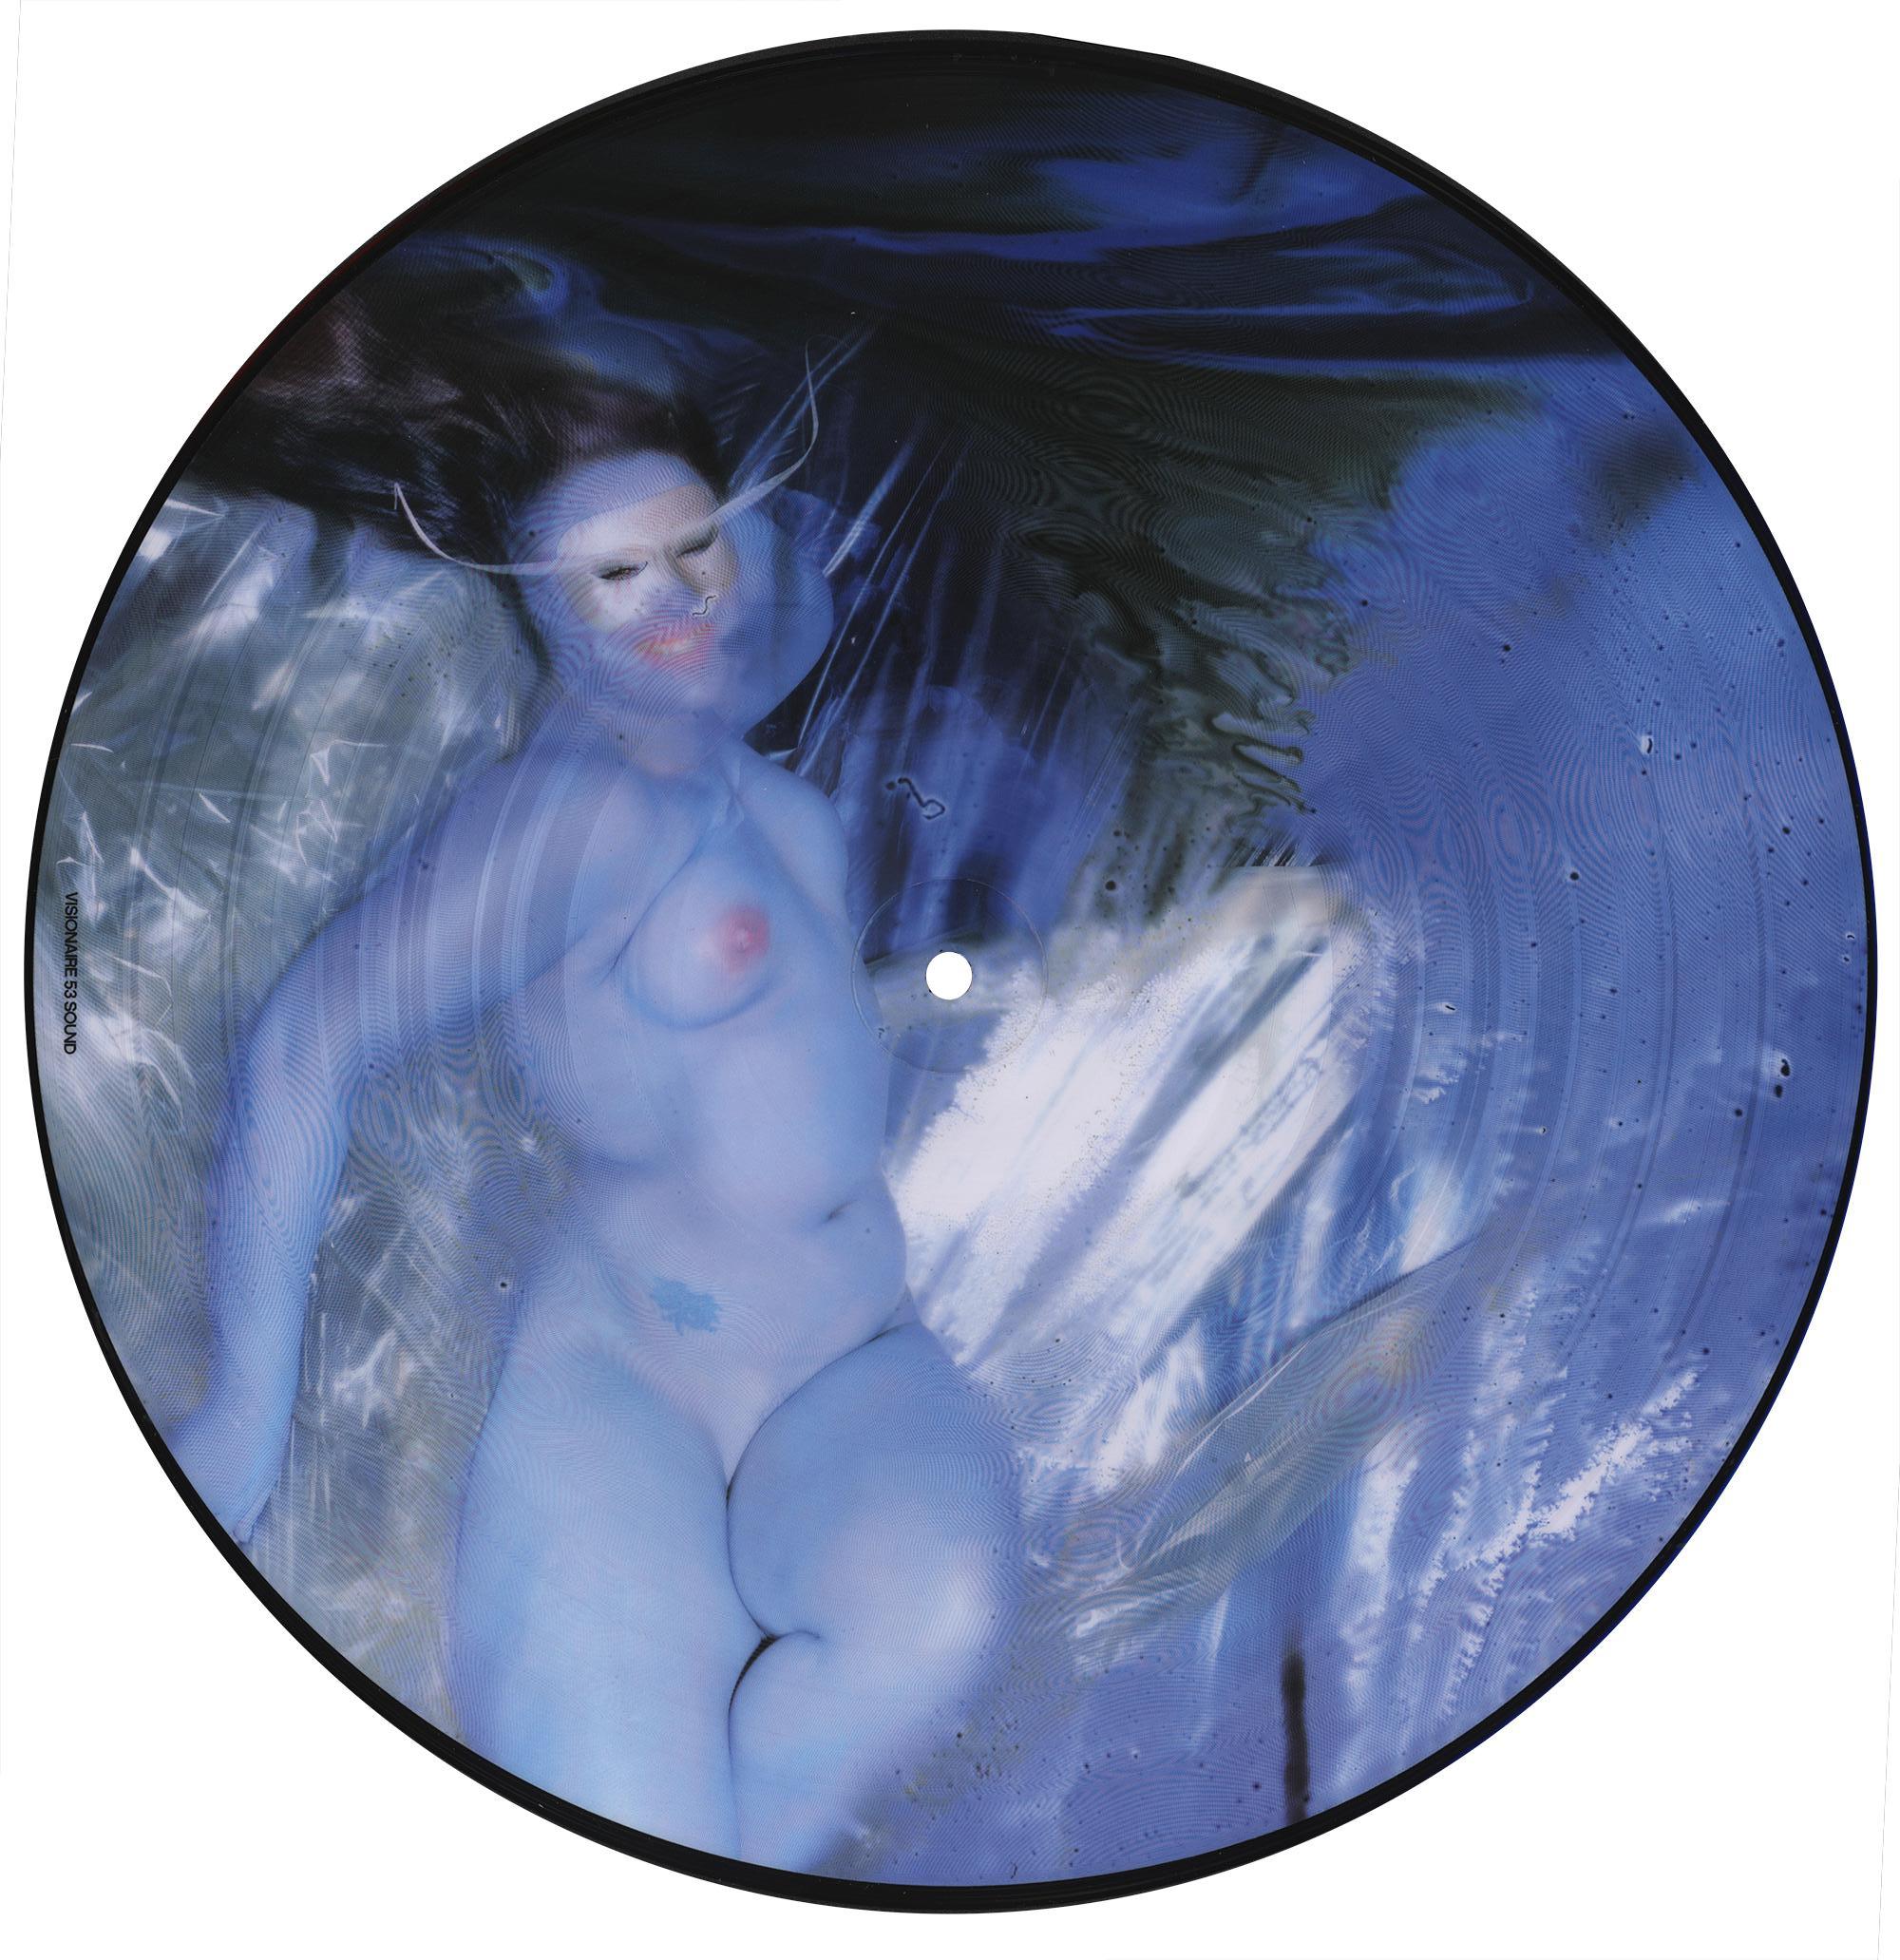 Nick Knight vinyl record art 2007:

Off-set print on vinyl record. Unsigned. 
Measure: 12 x 12 inches
Excellent condition
Published by Visionaire Fashion, 2007
A very cool frame piece

About Nick Knight:
Nick Knight (British, b.1958) is an